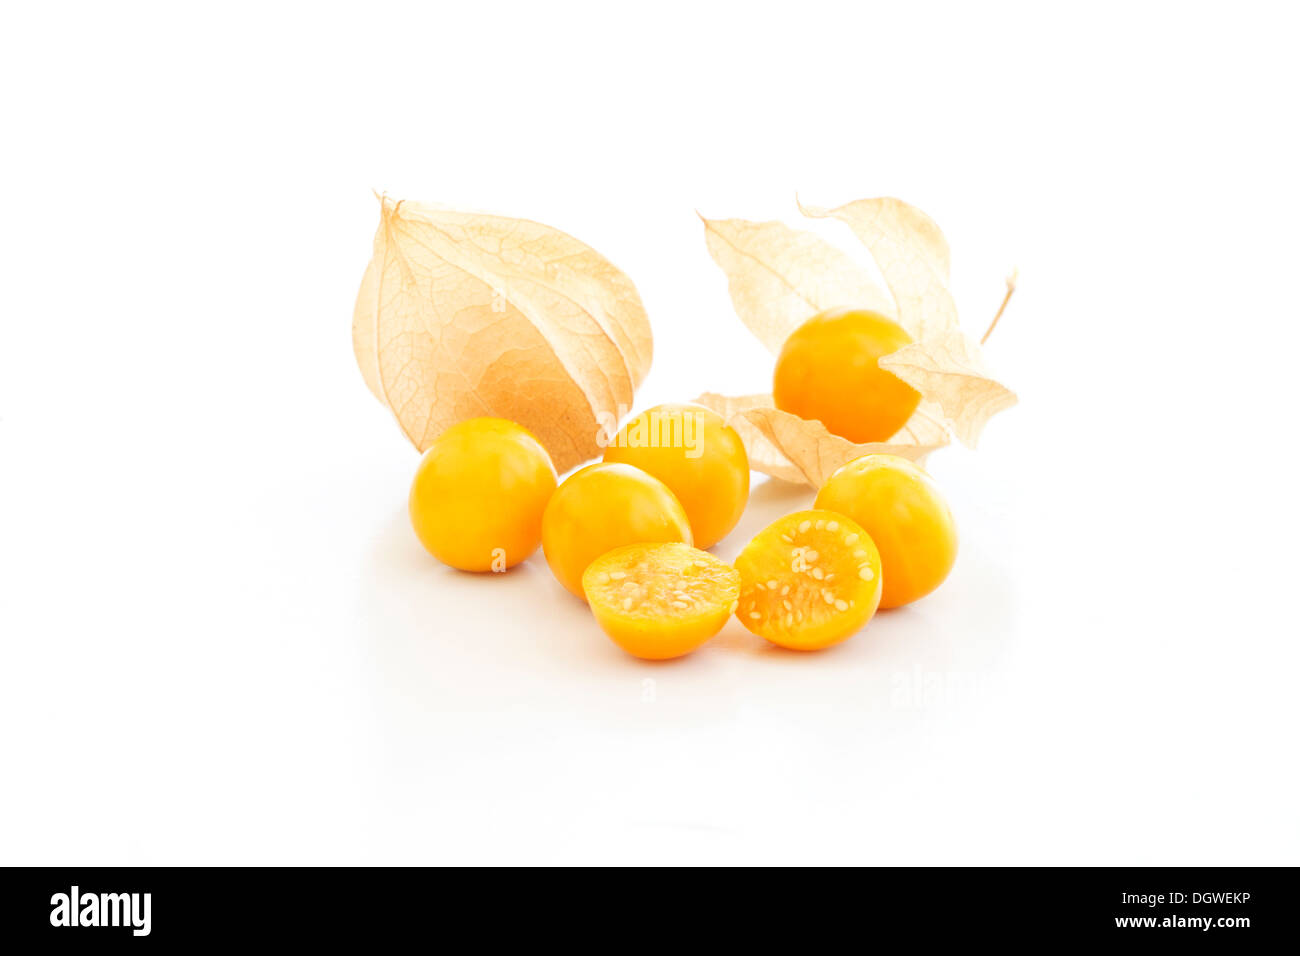 Cape gooseberry (physalis) over a white background Stock Photo